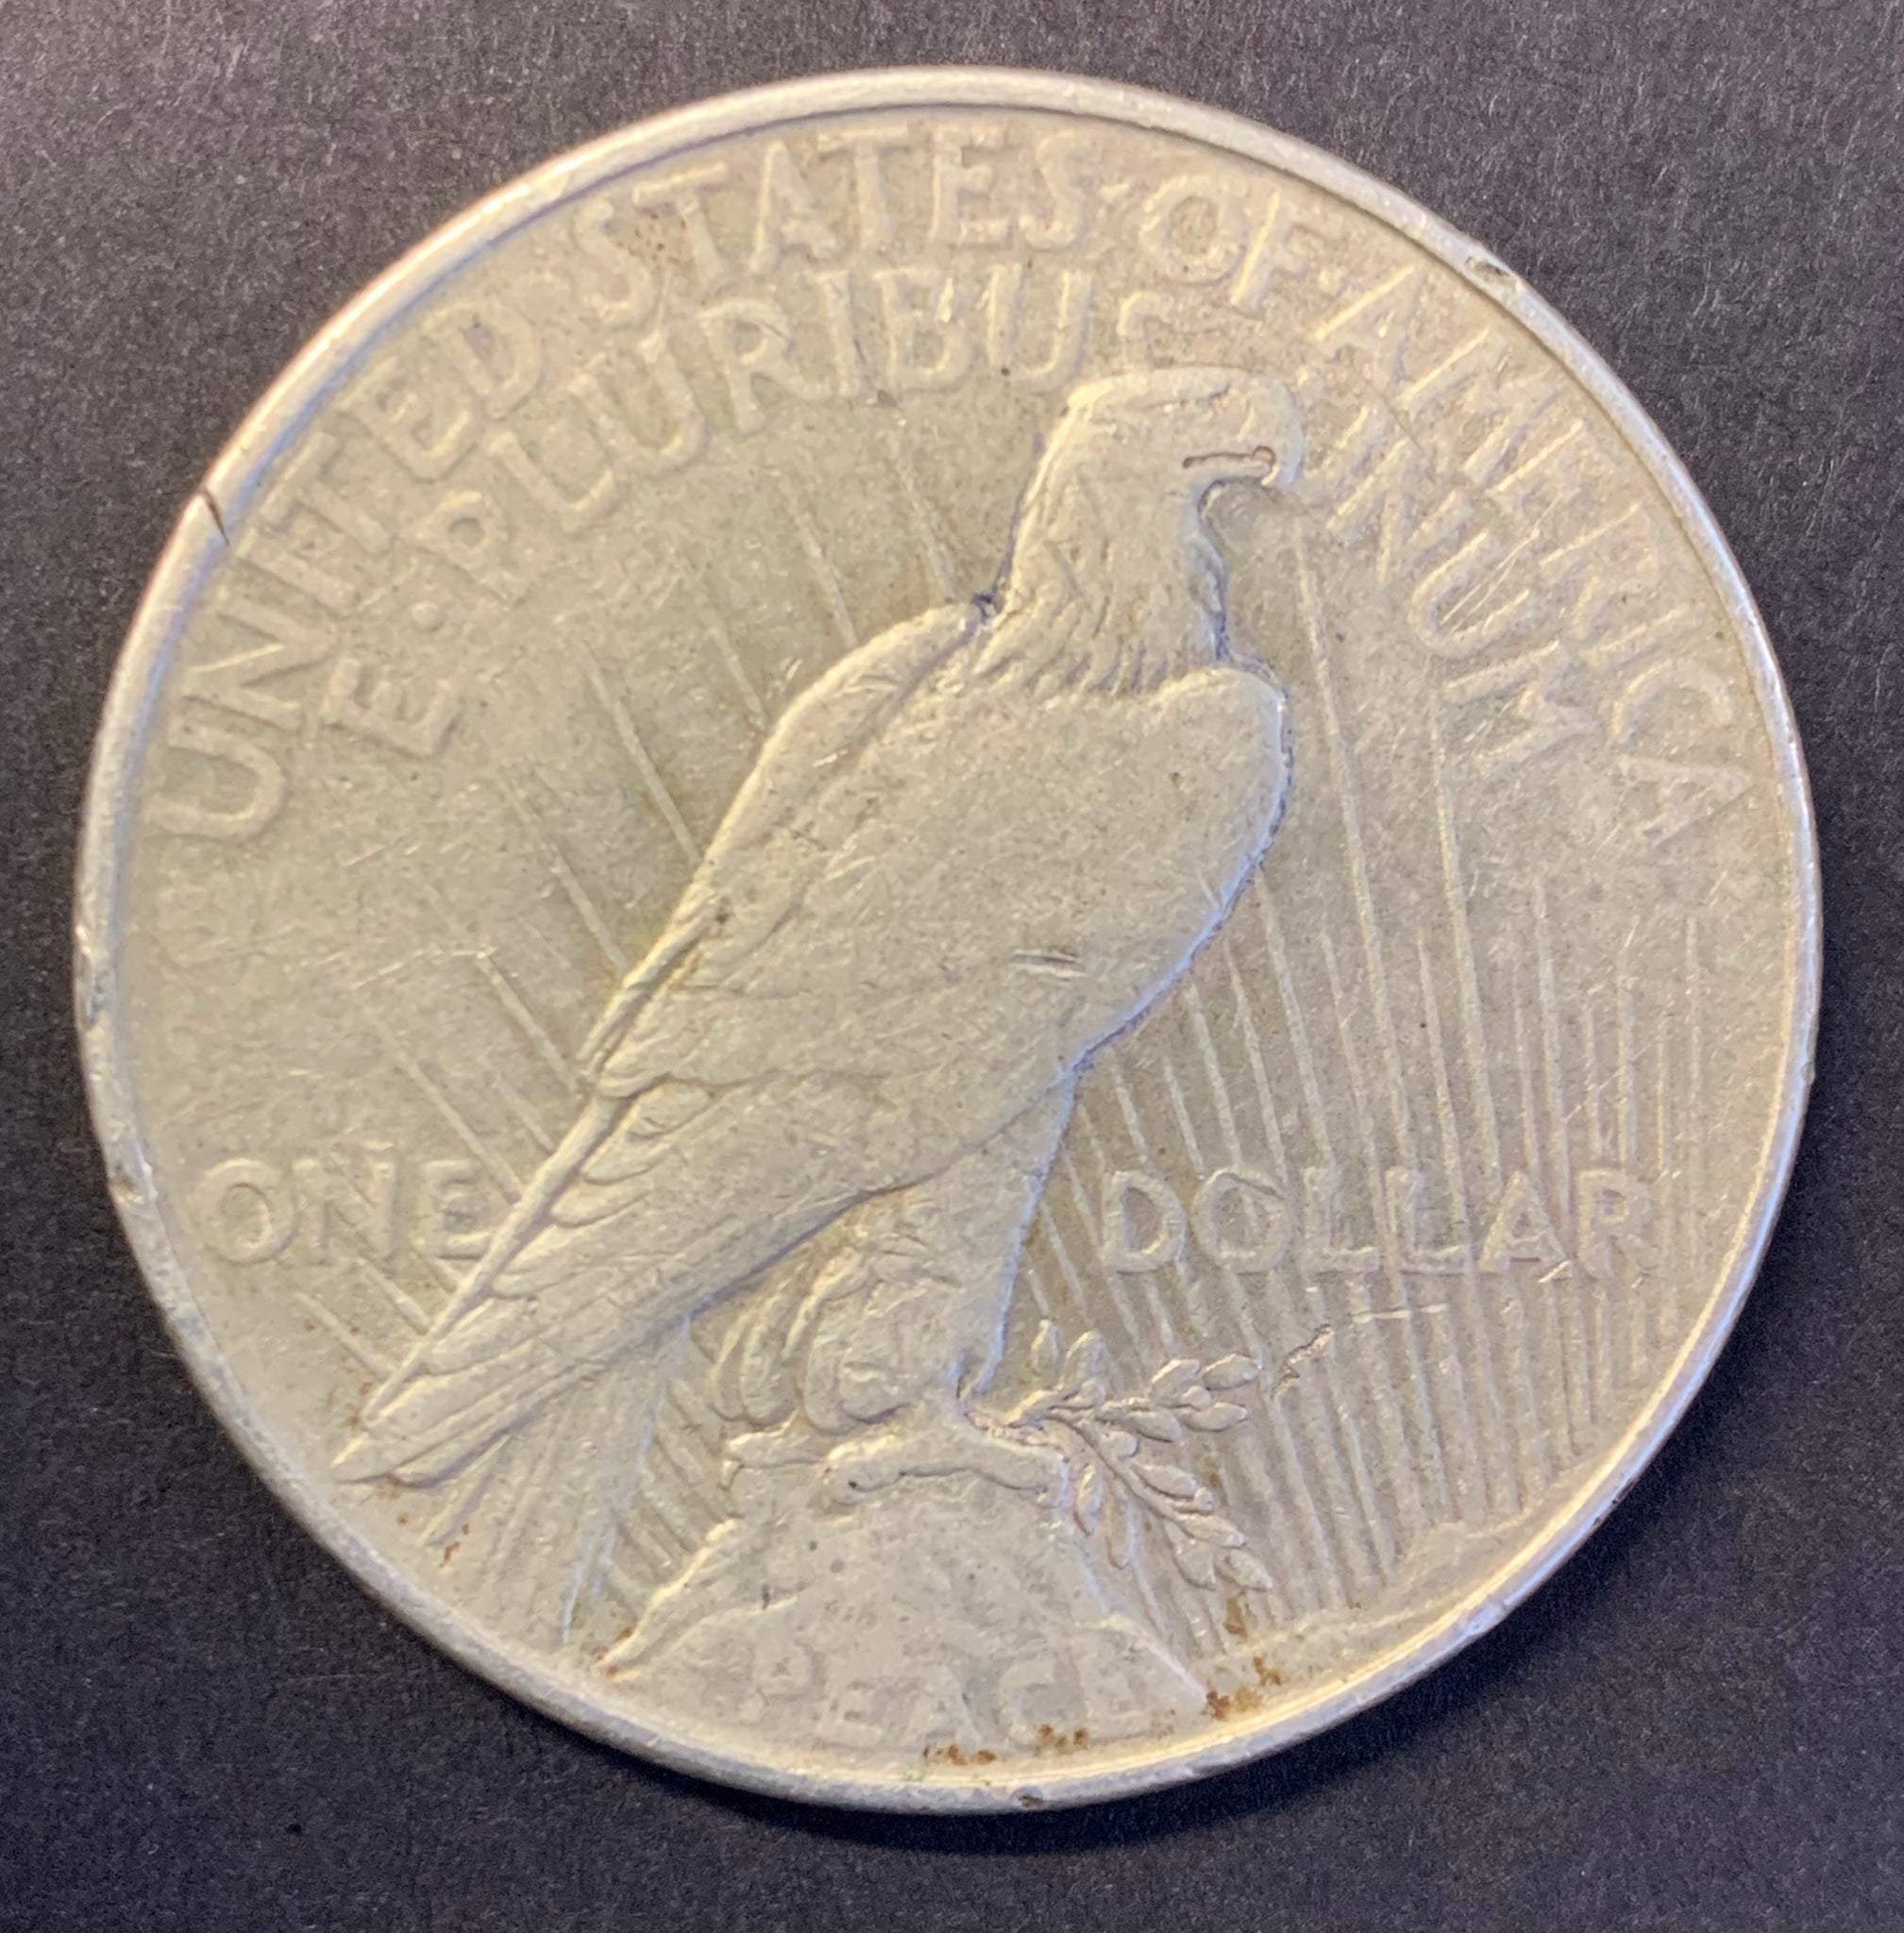 USA United States of America $1 1922 Peace Silver Dollar VF